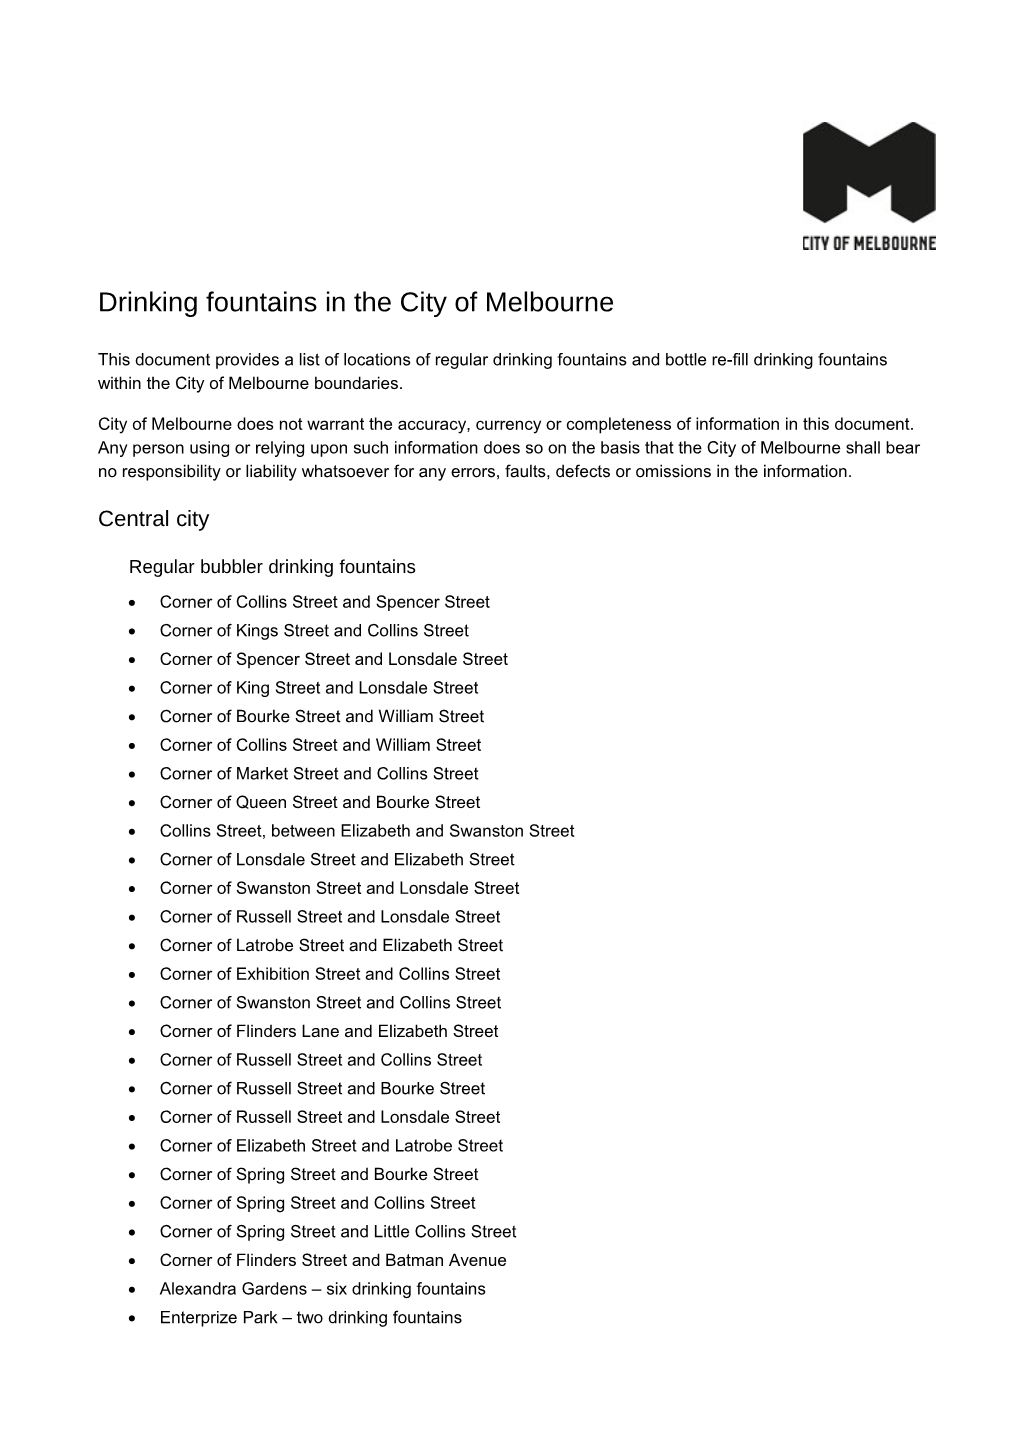 Drinking Fountains in the City of Melbourne